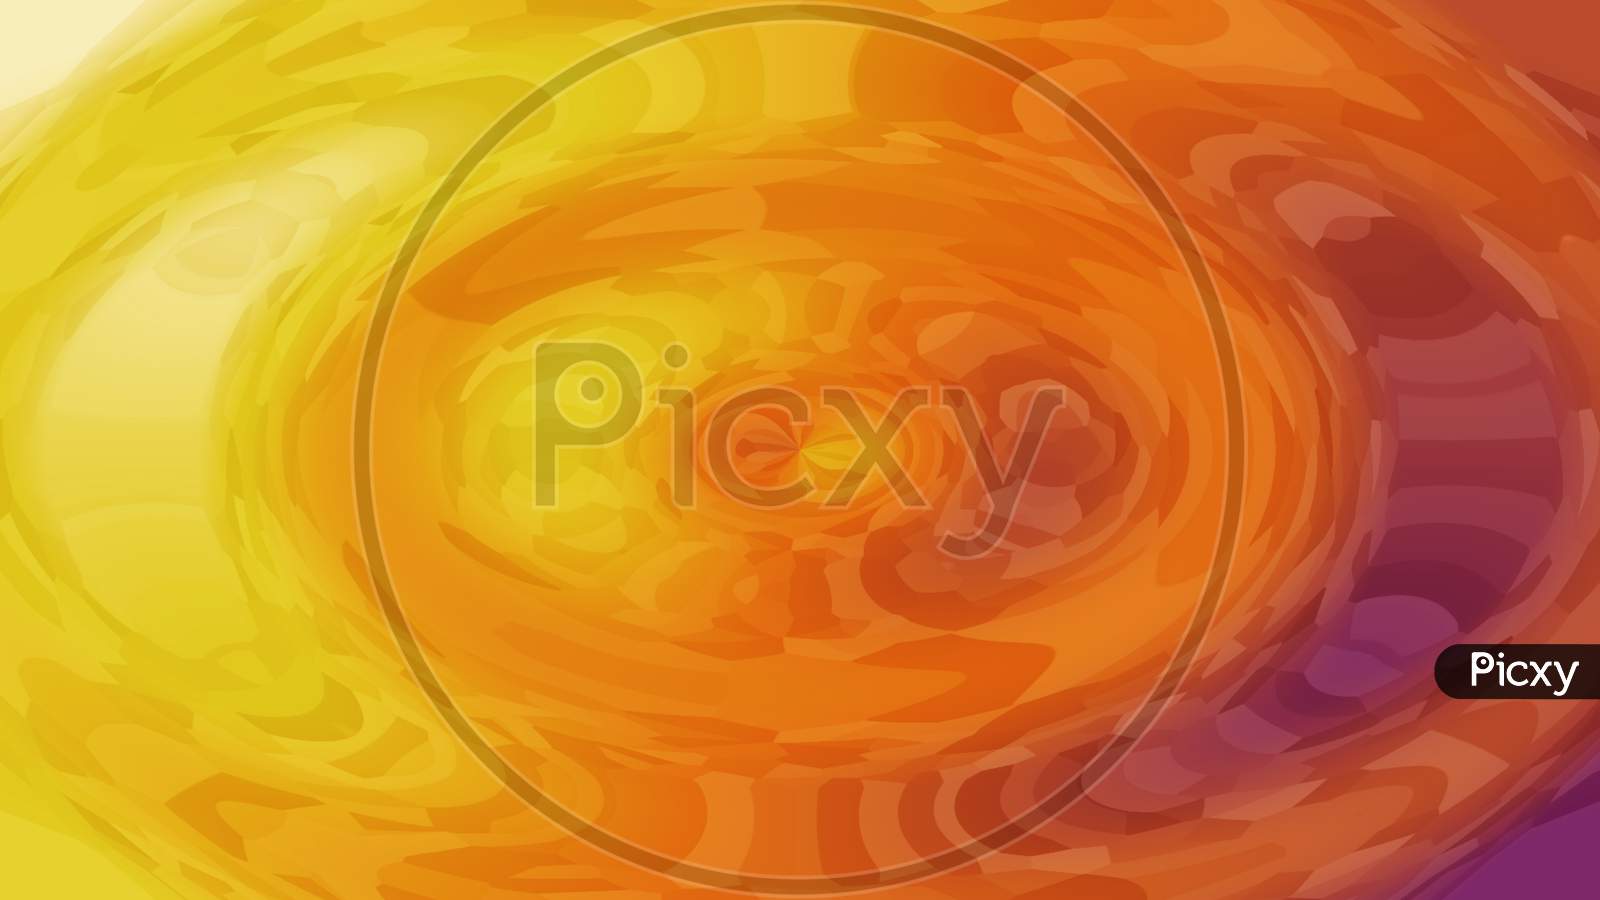 A creative wave design abstract background.